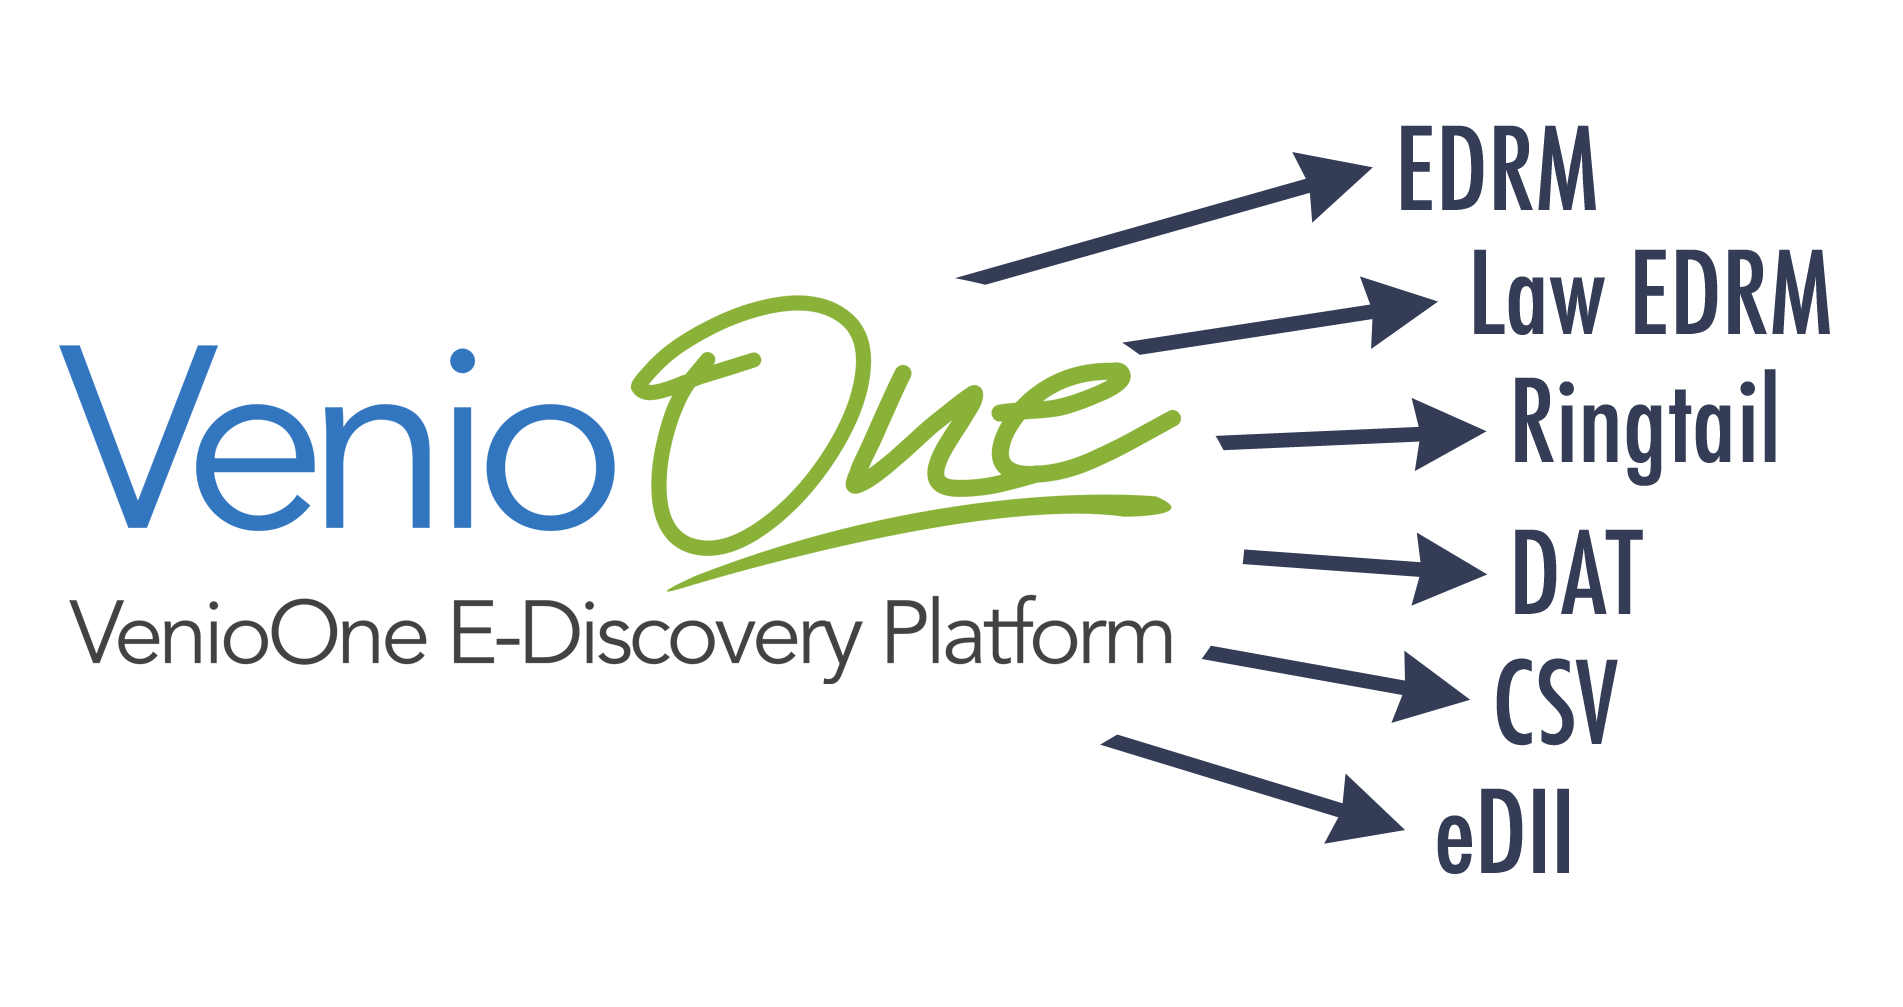 VenioOne can export to various load file types. (EDRM, Law EDRM, Ringtail, DAT, CSV, eDII). The NearZero Discovery service offered by REW Computing includes full end-to-end eDiscovery services for Newmarket, Toronto, the GTA, and Ontario, Canada. ( near zero discovery or nearzerodiscovery )